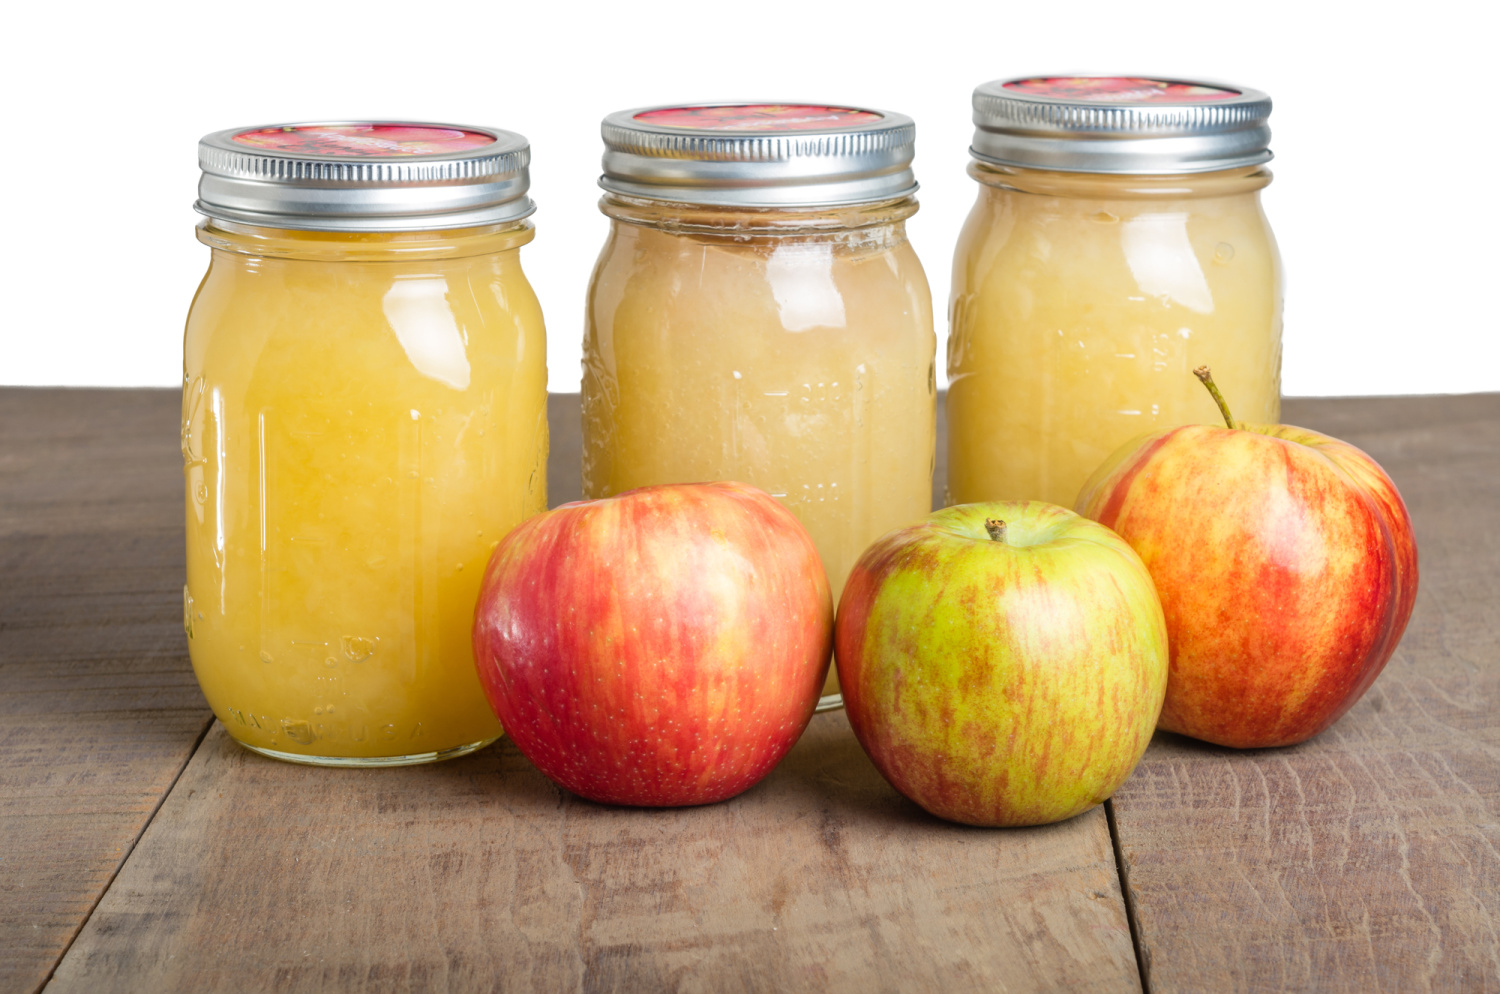 Enjoy this tutorial on canning your own applesauce. It's easy and delicious! 